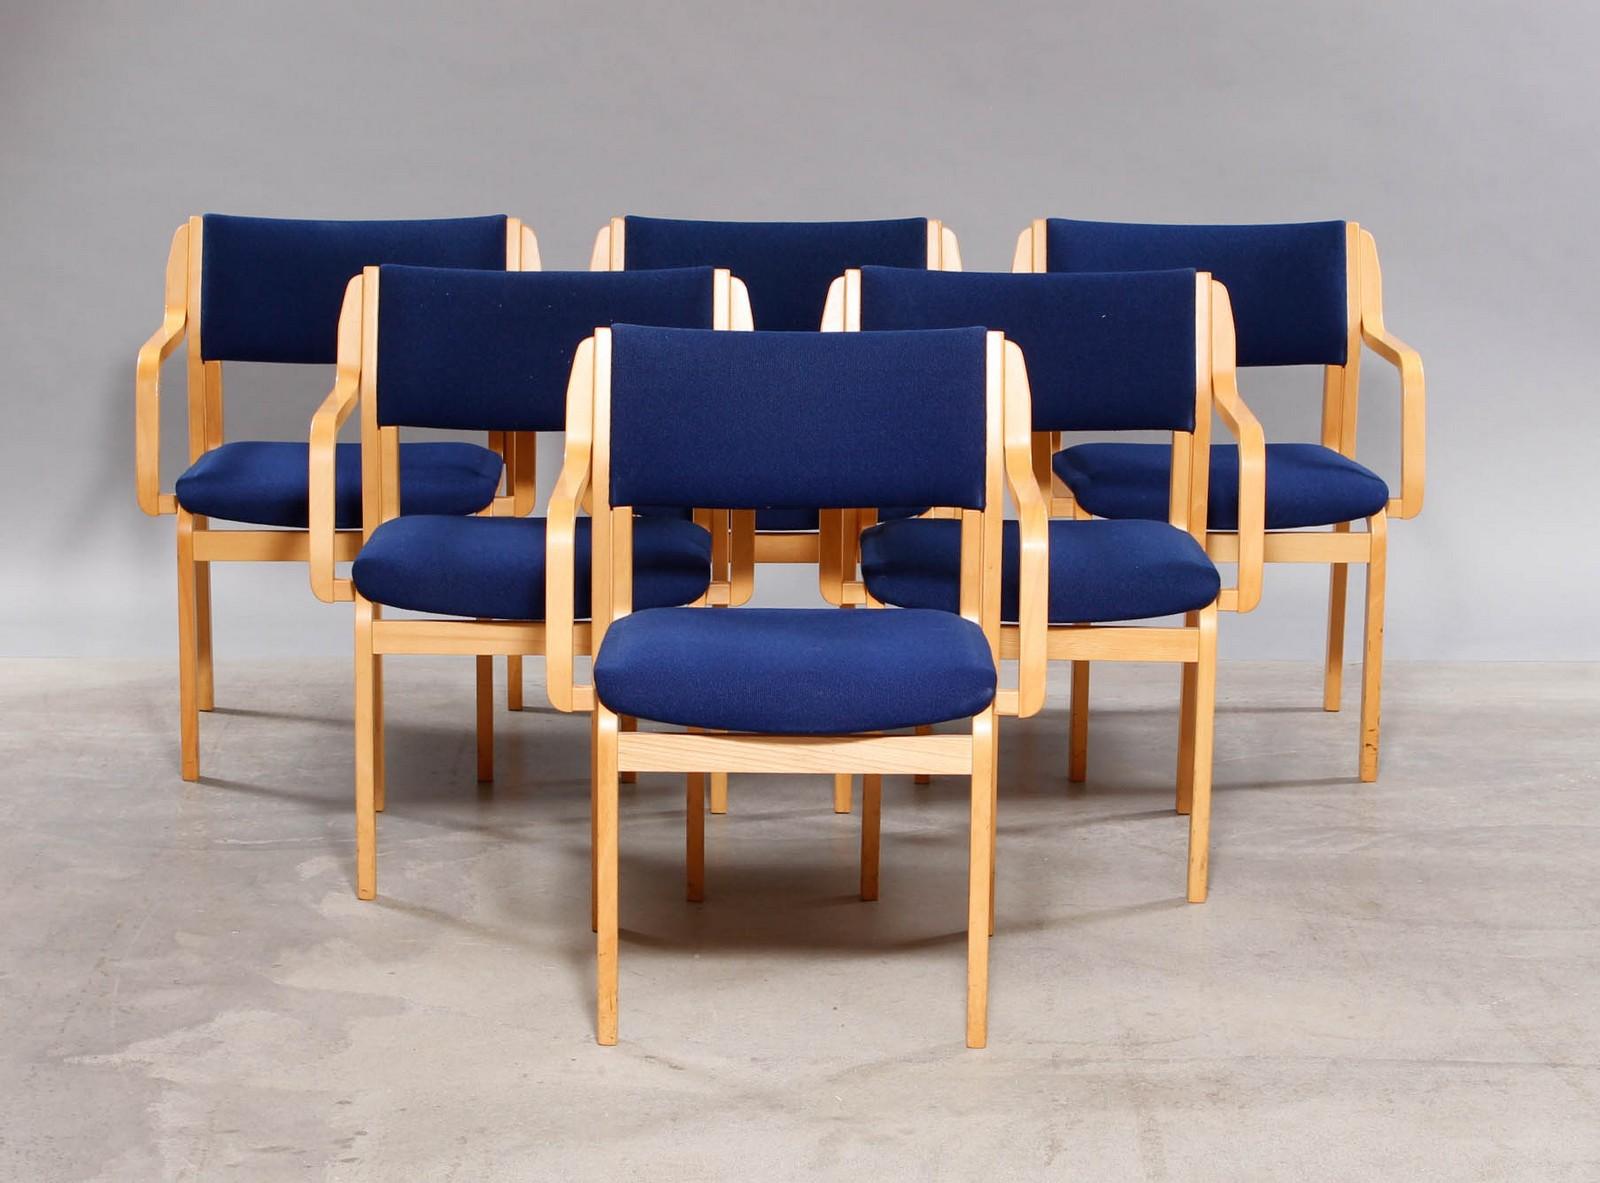 Farstrup furniture. Six (6) chairs Farstrup furniture. Conference chairs made of polished lacquered beech wood with armrests, stackable, seats and backs covered with blue wool fabric.